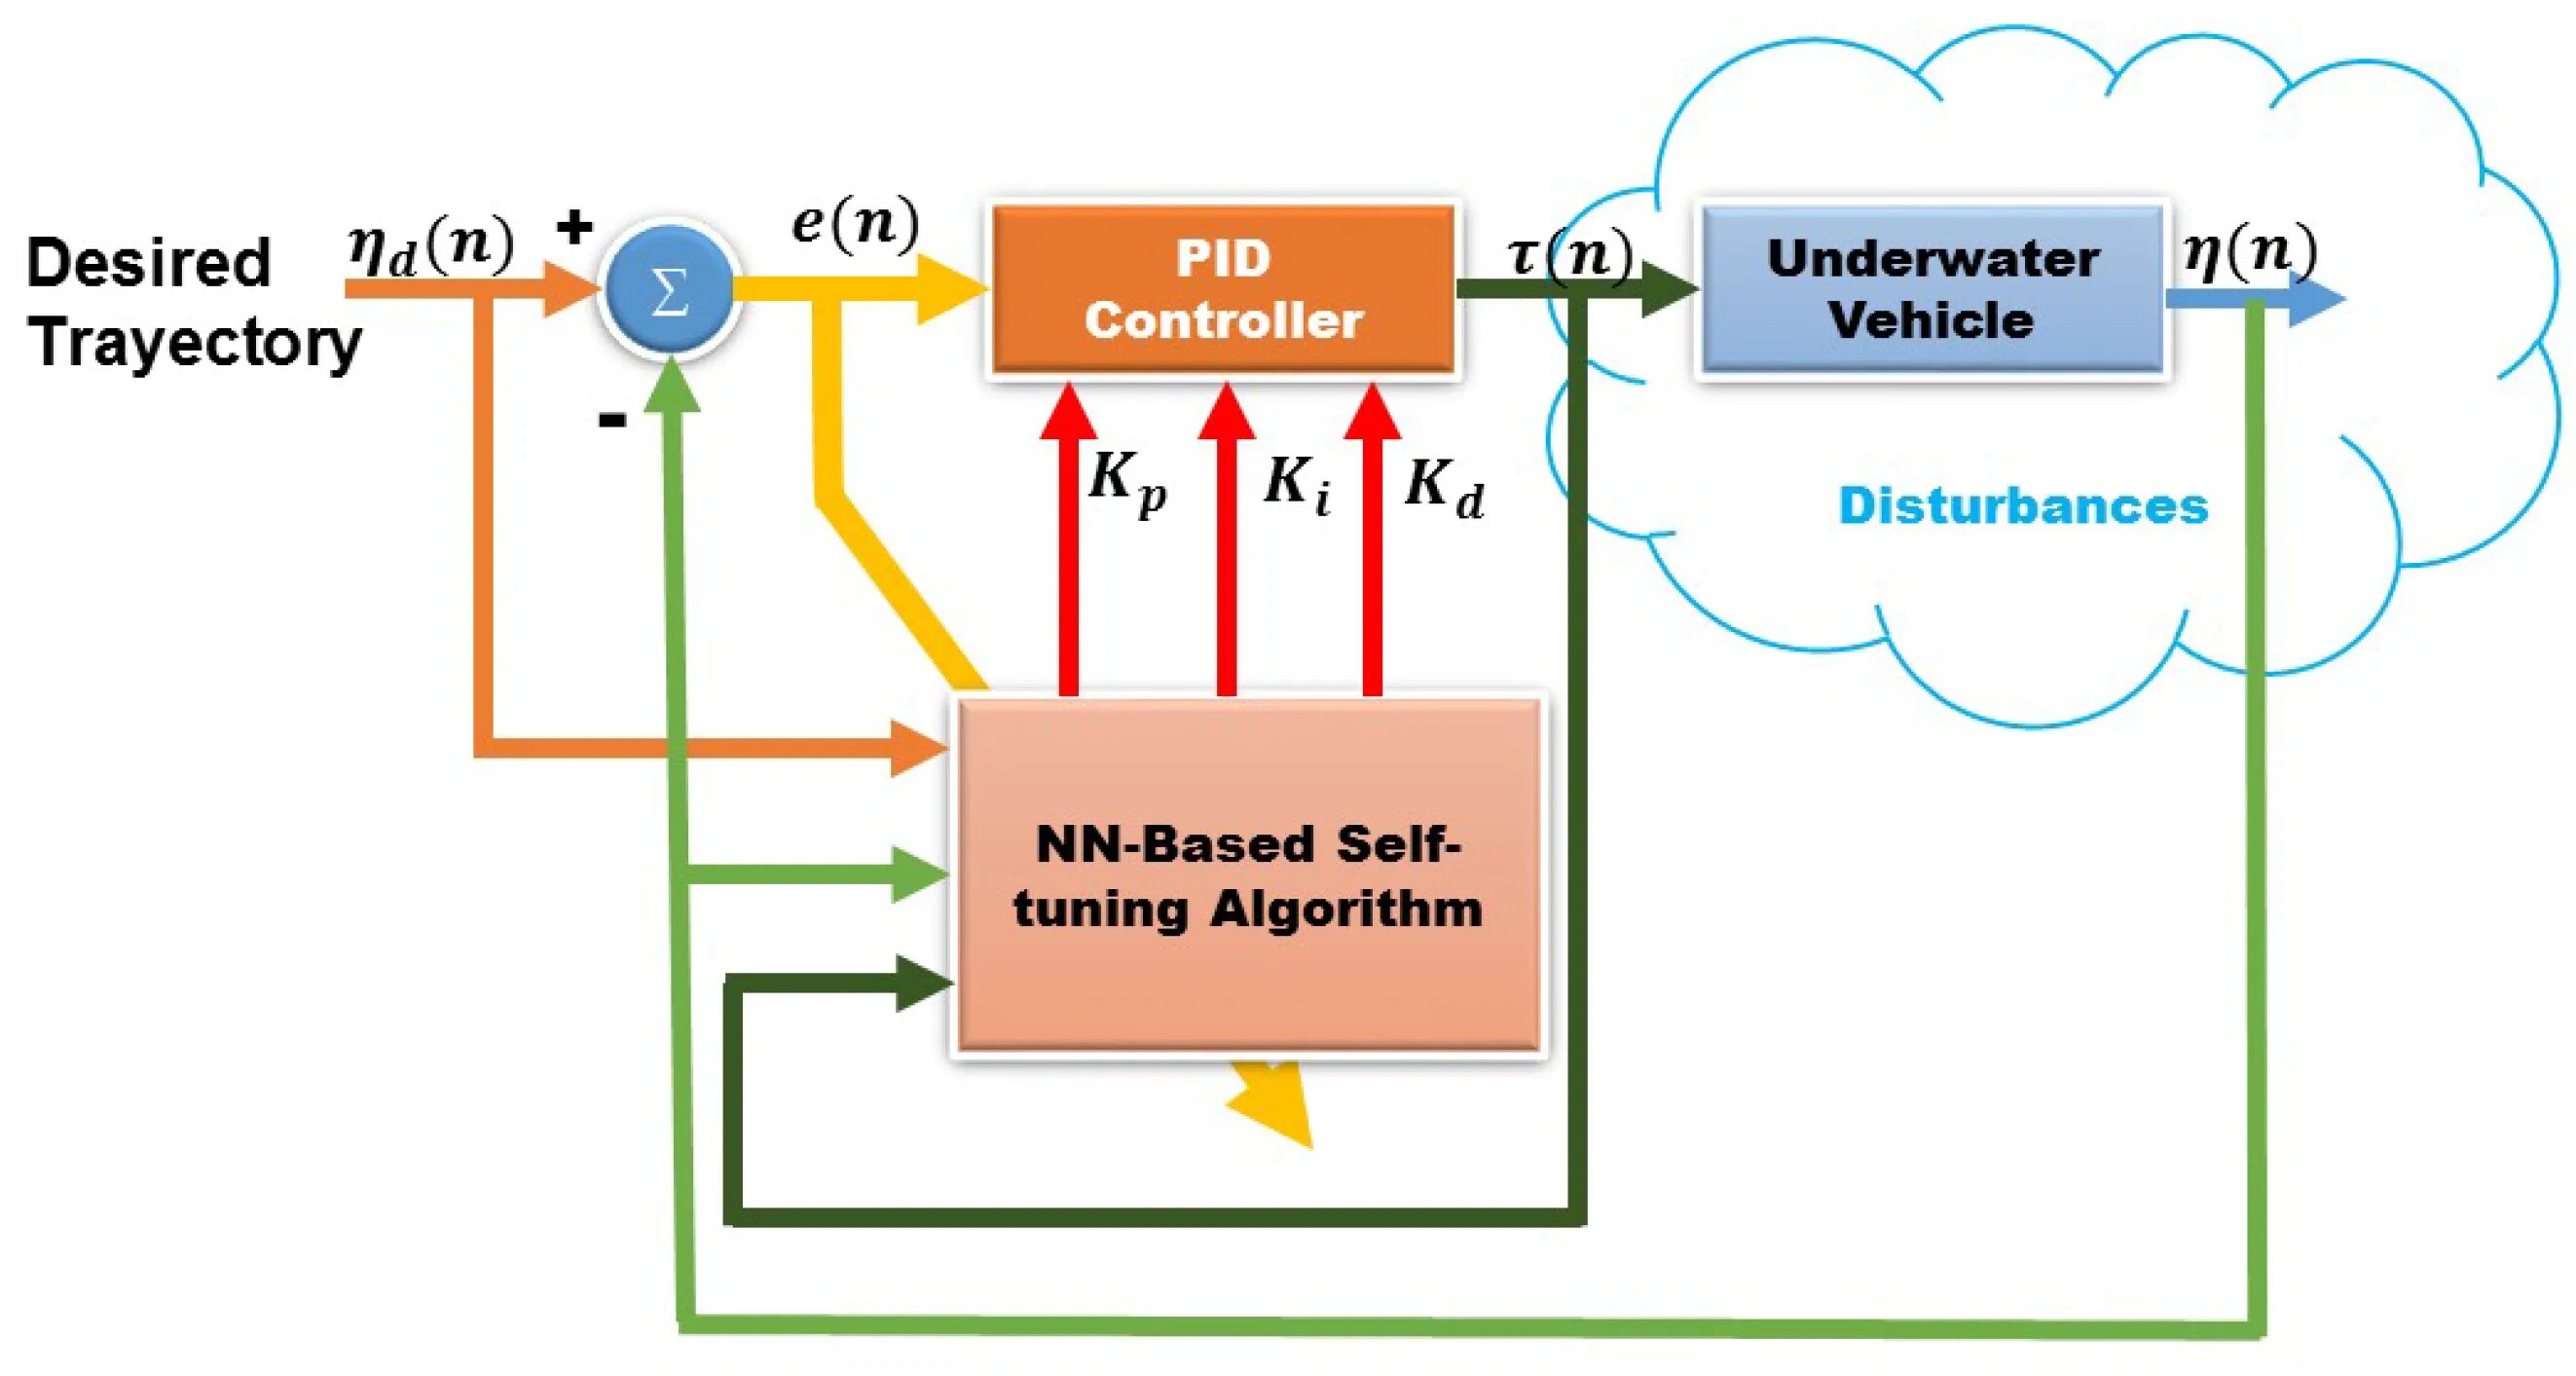 Pid Control. Pid Controller Tuning. Types of pid Controller. Pid Controller HMI. Int pid